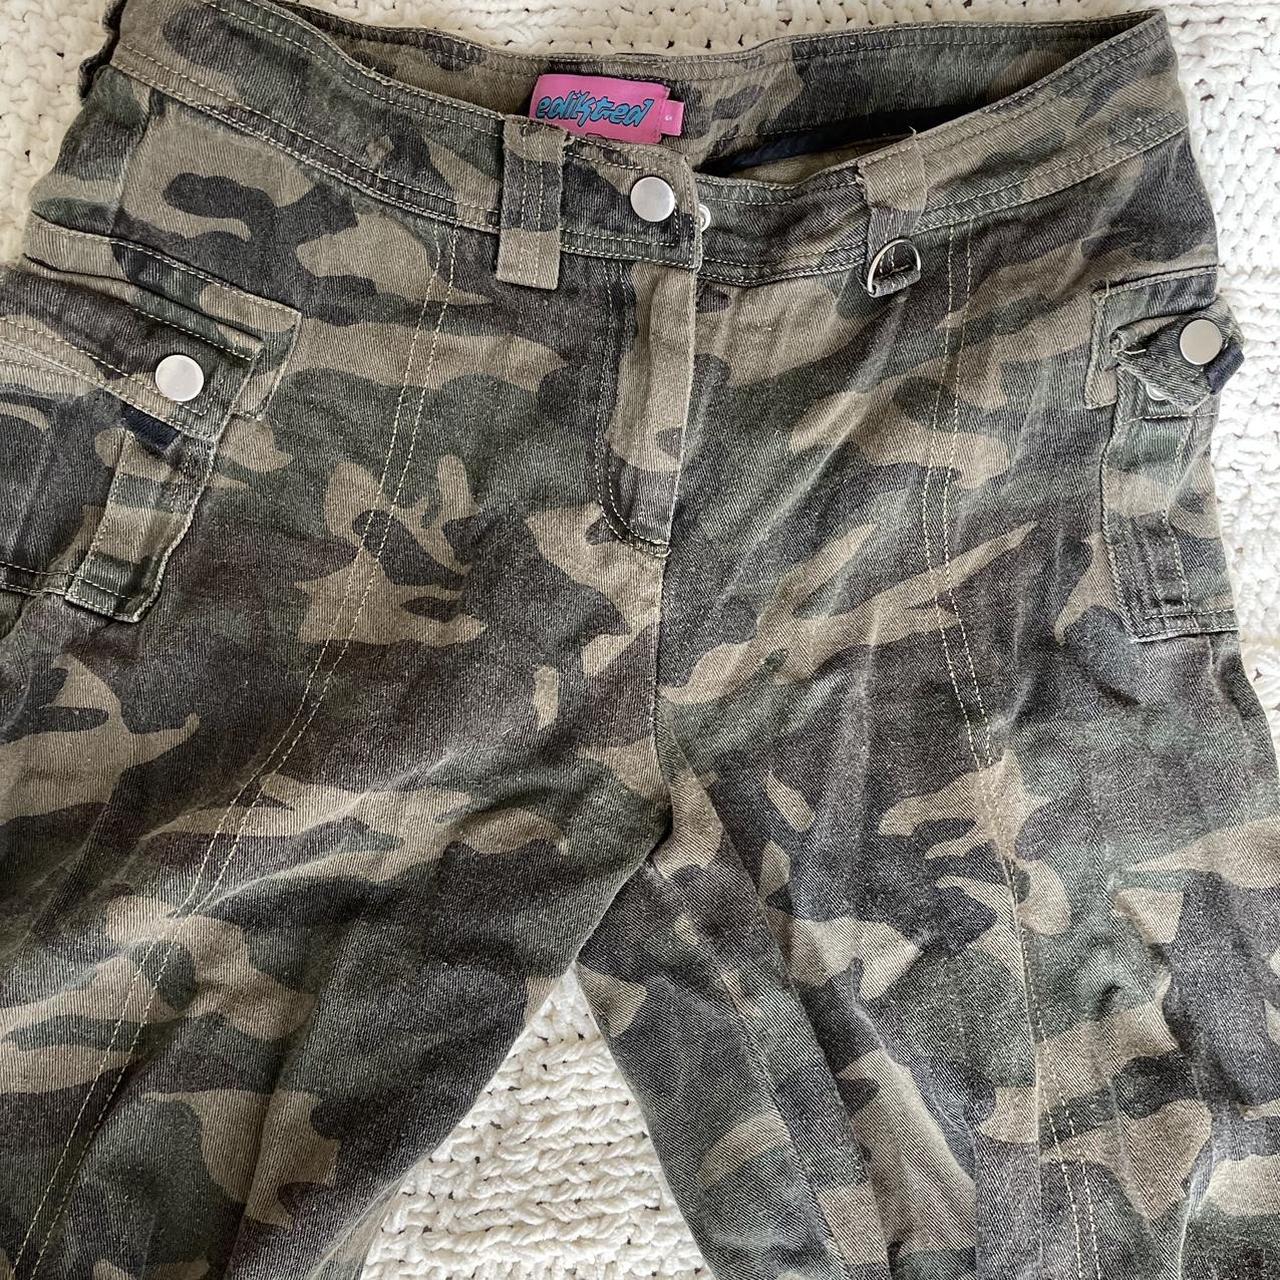 Edikted camo pants I’m in love with these - Depop